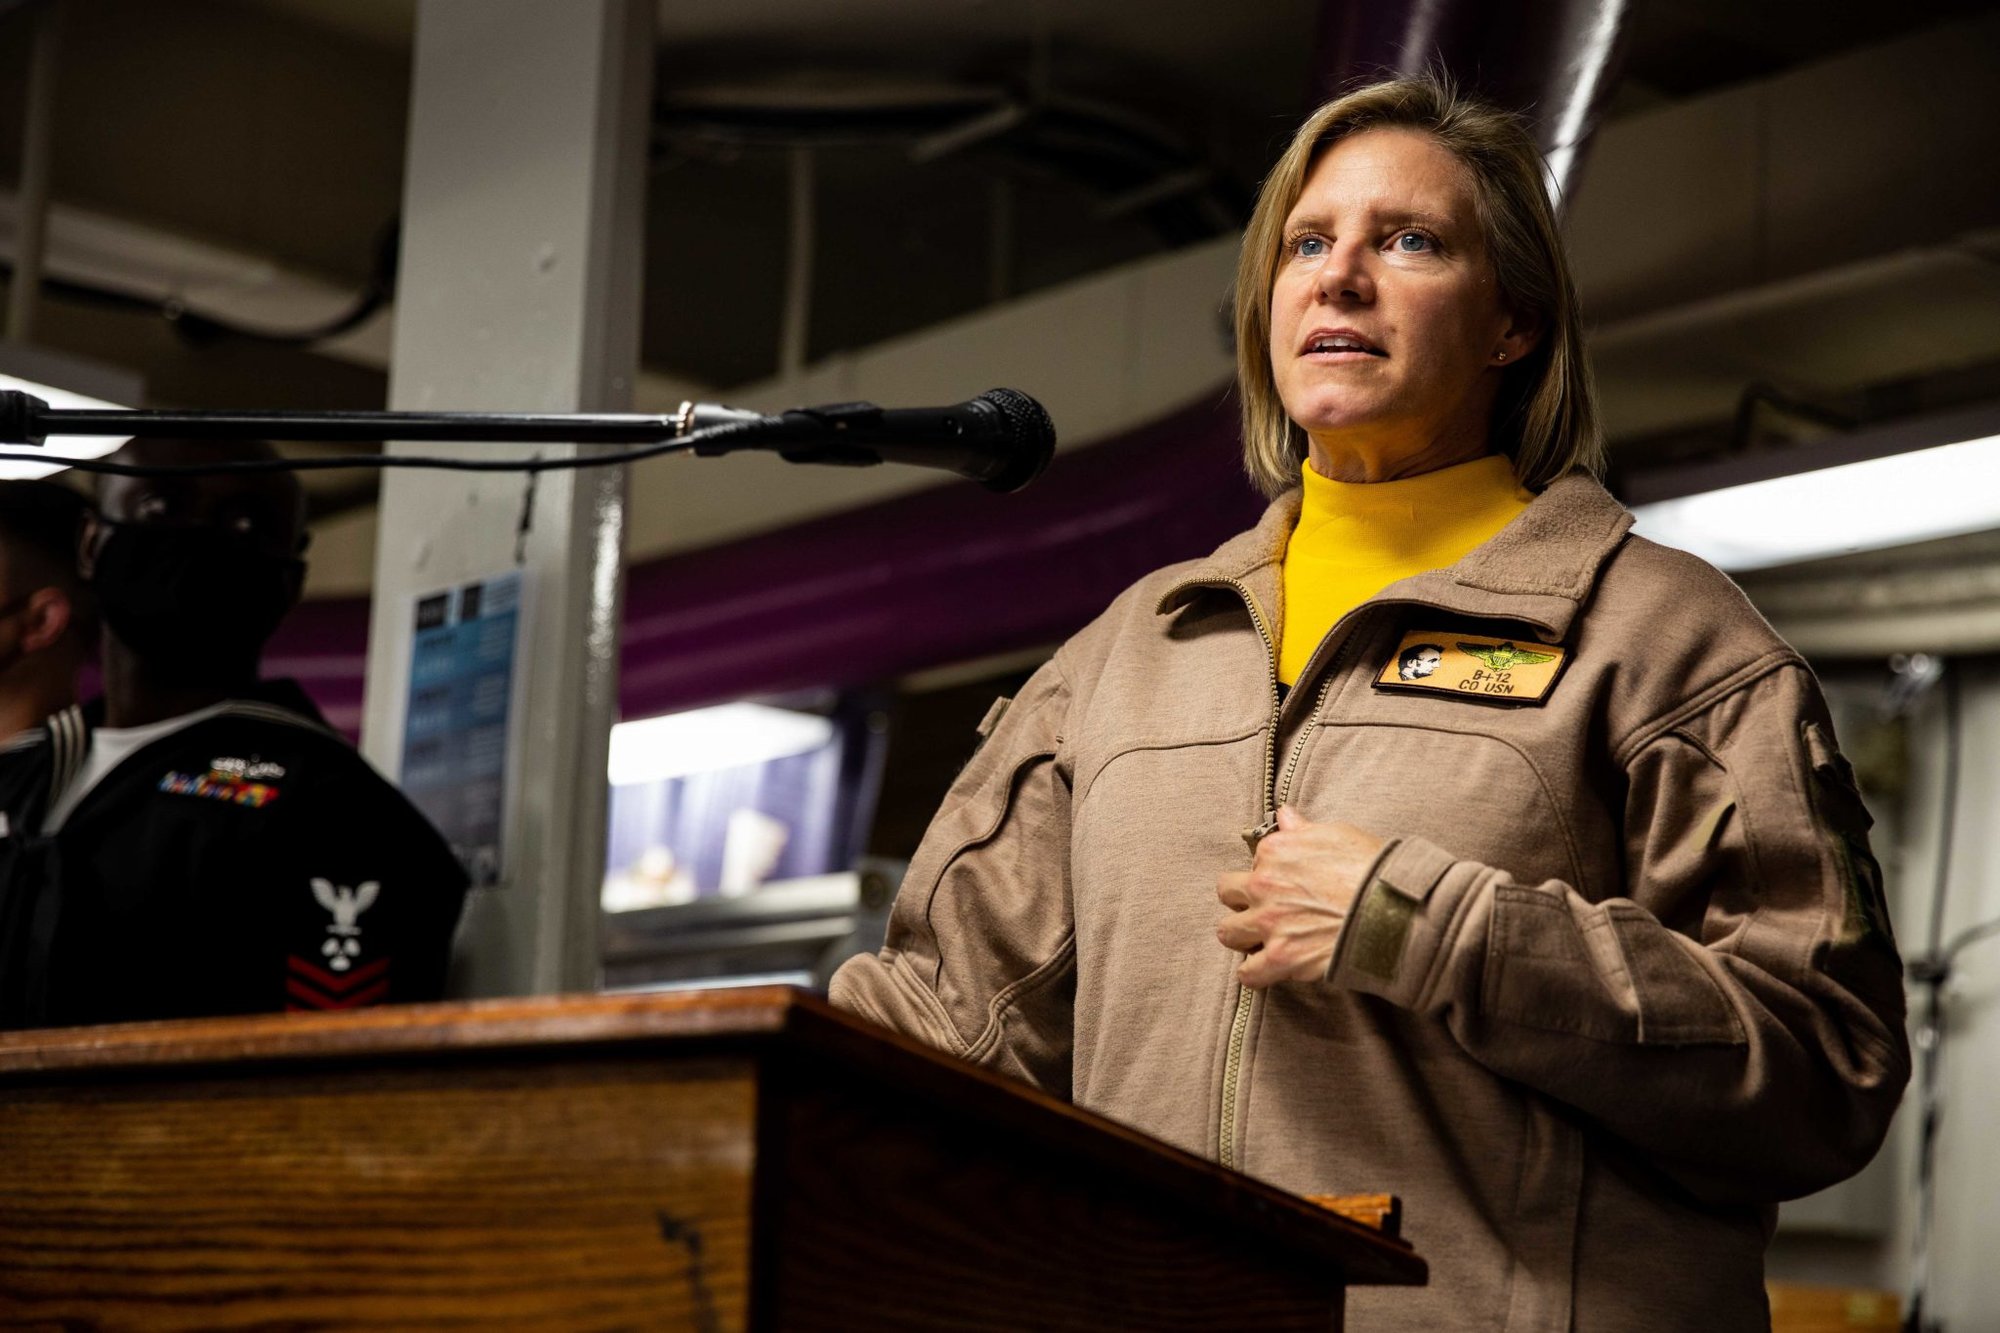 Capt. Amy Bauernschmidt, commanding officer of the aircraft carrier Abraham Lincoln